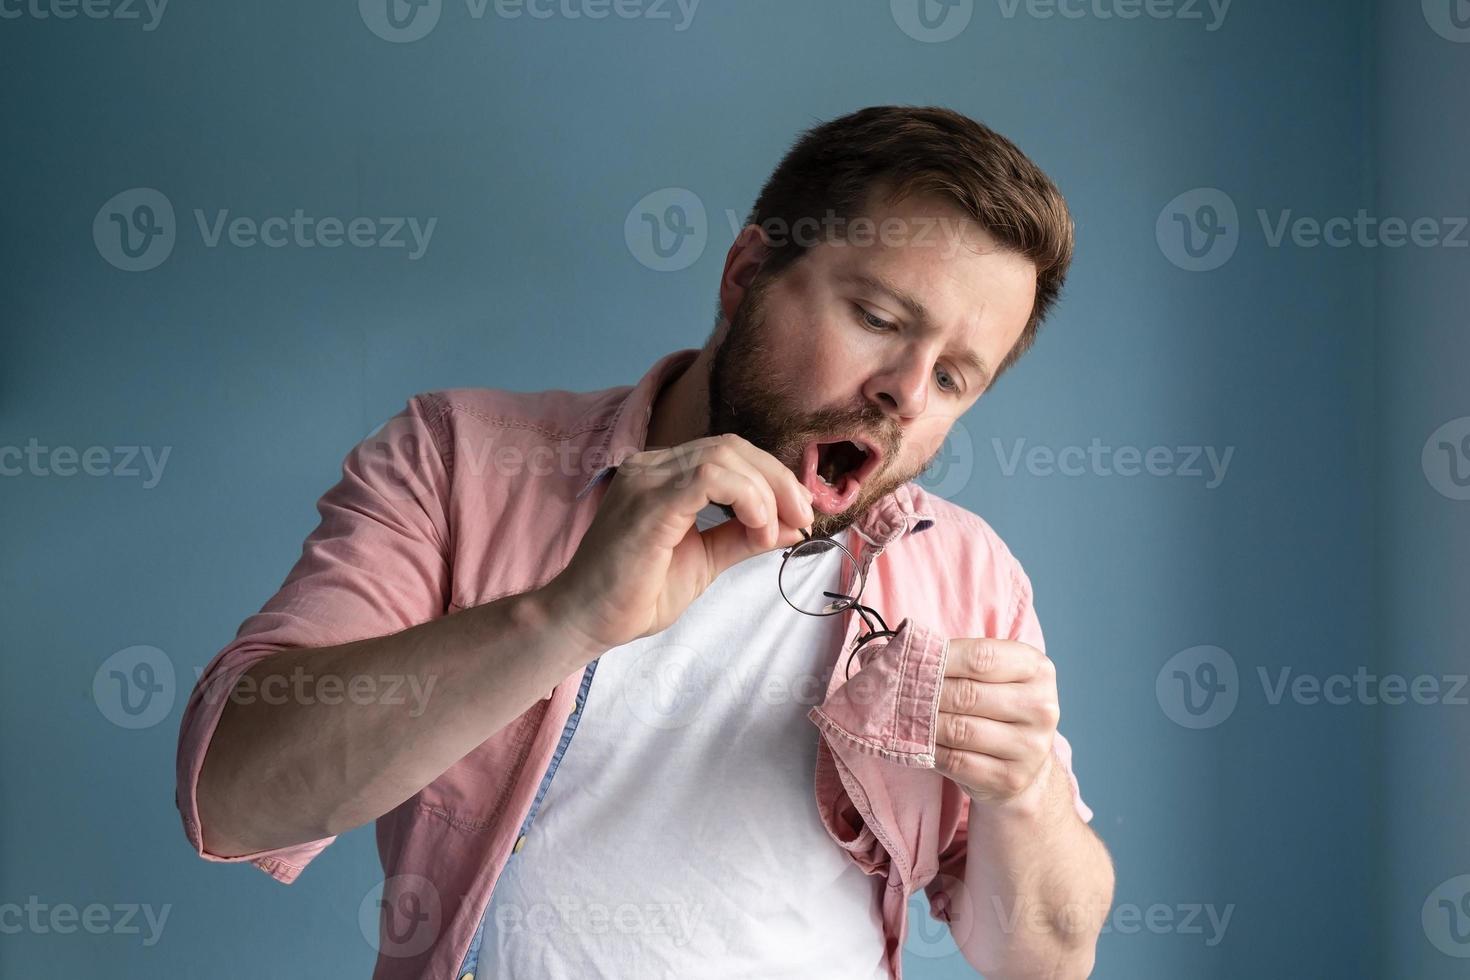 Concentrated man breathes on the lenses of his glasses and wipes them from dirt and dust with shirt. photo